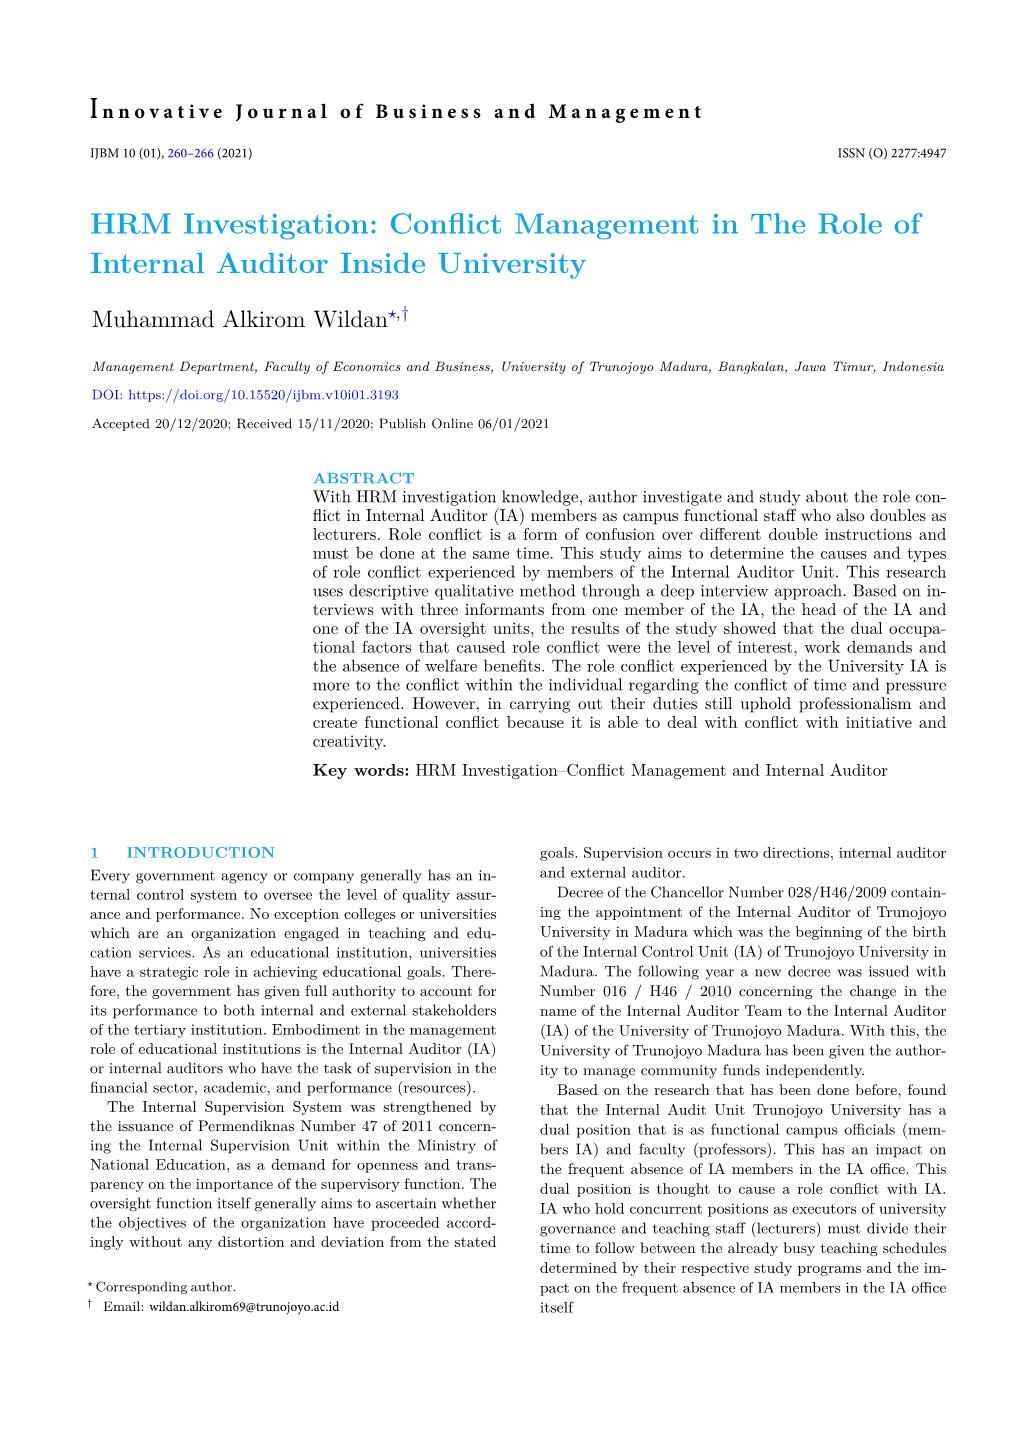 Conflict Management in the Role of Internal Auditor Inside University